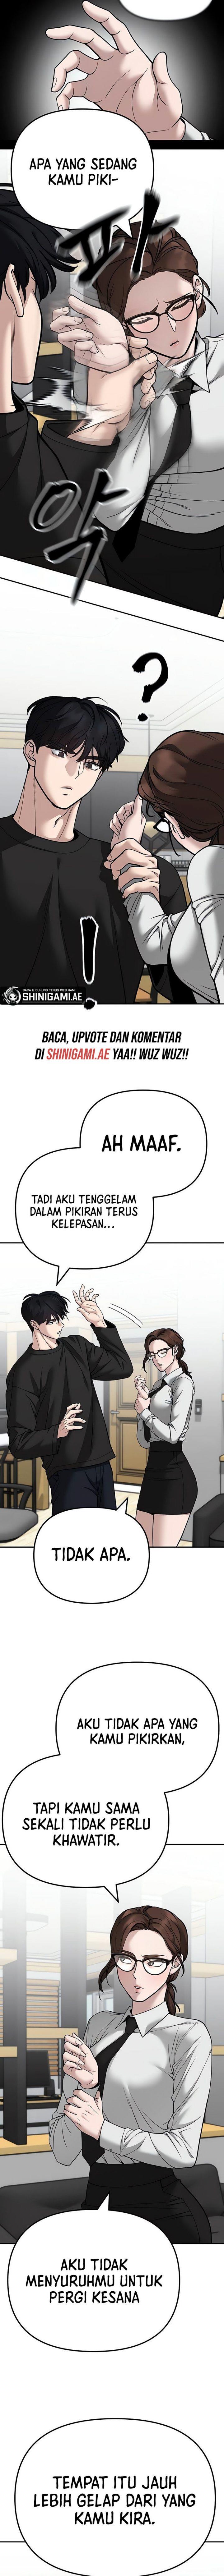 The Bully In Charge Chapter 98